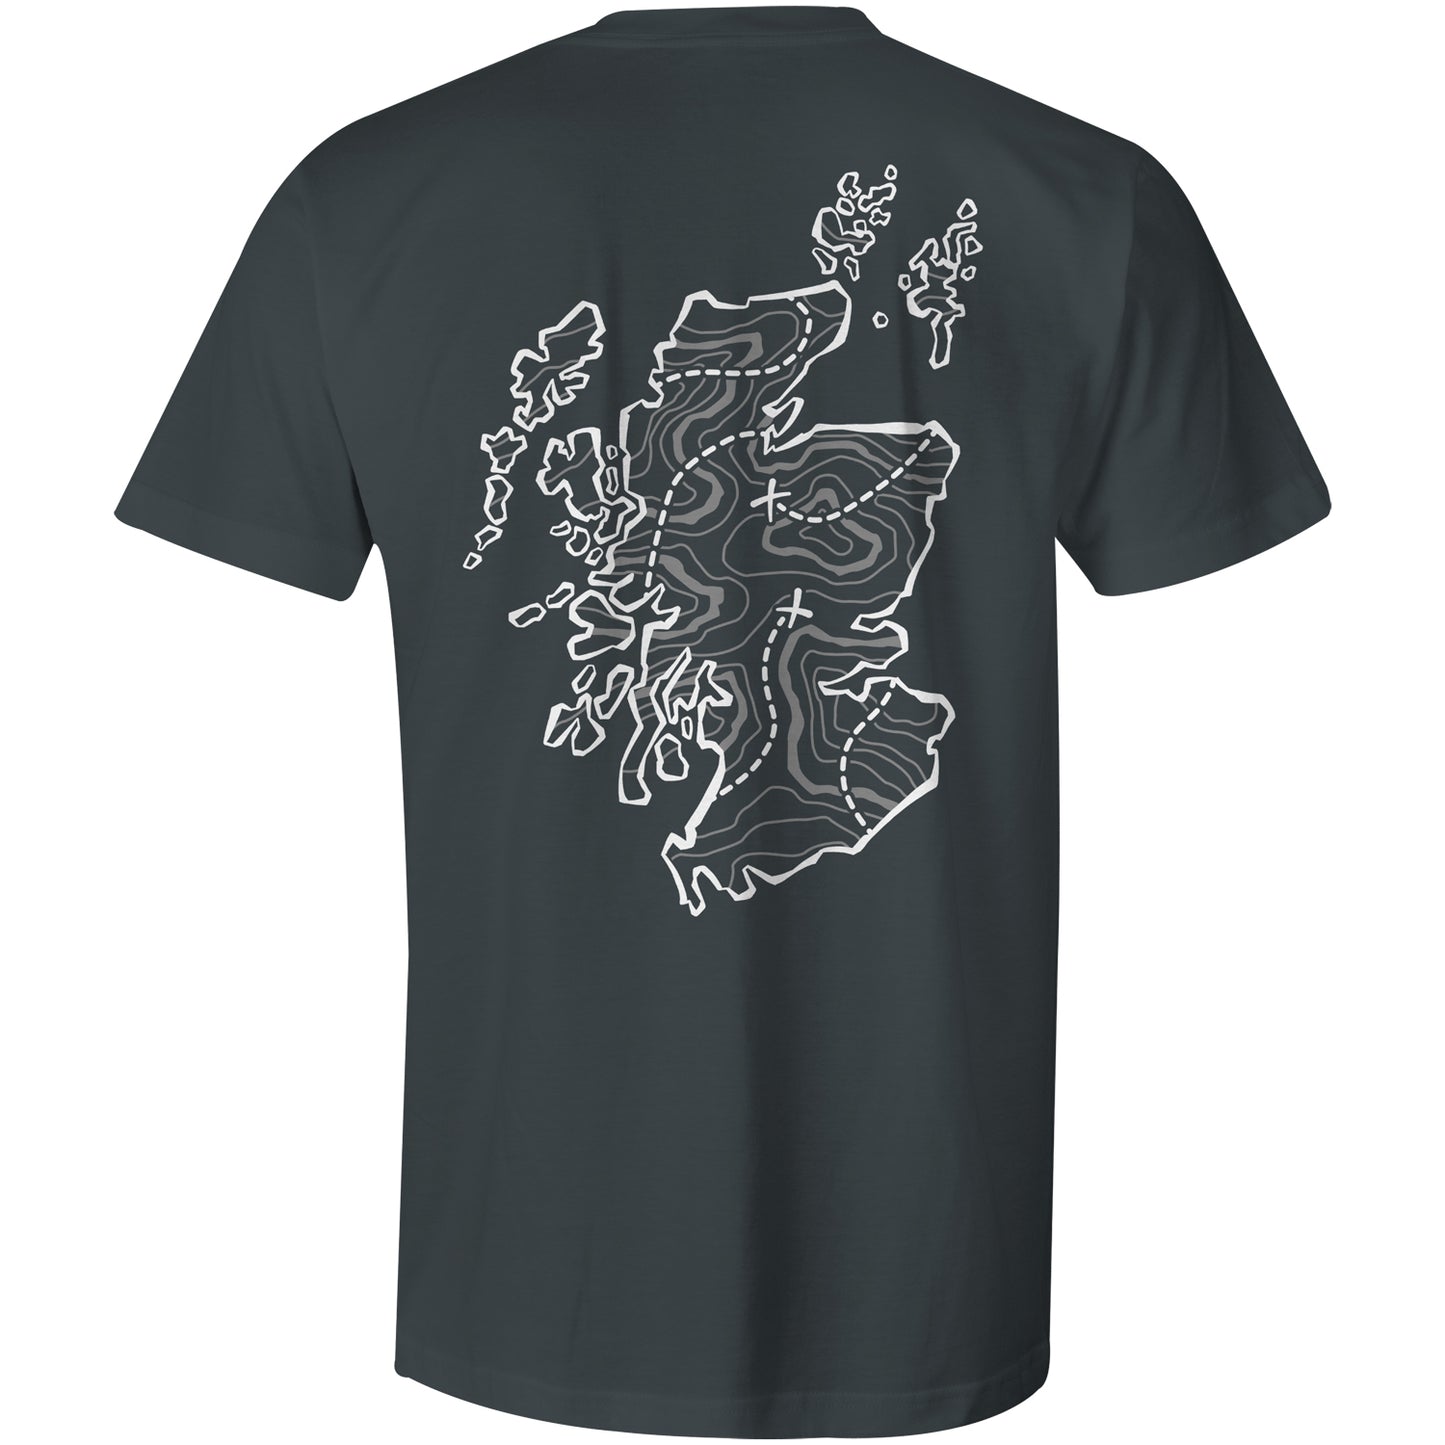 ge lost in scotland map design on the back of the tshirt